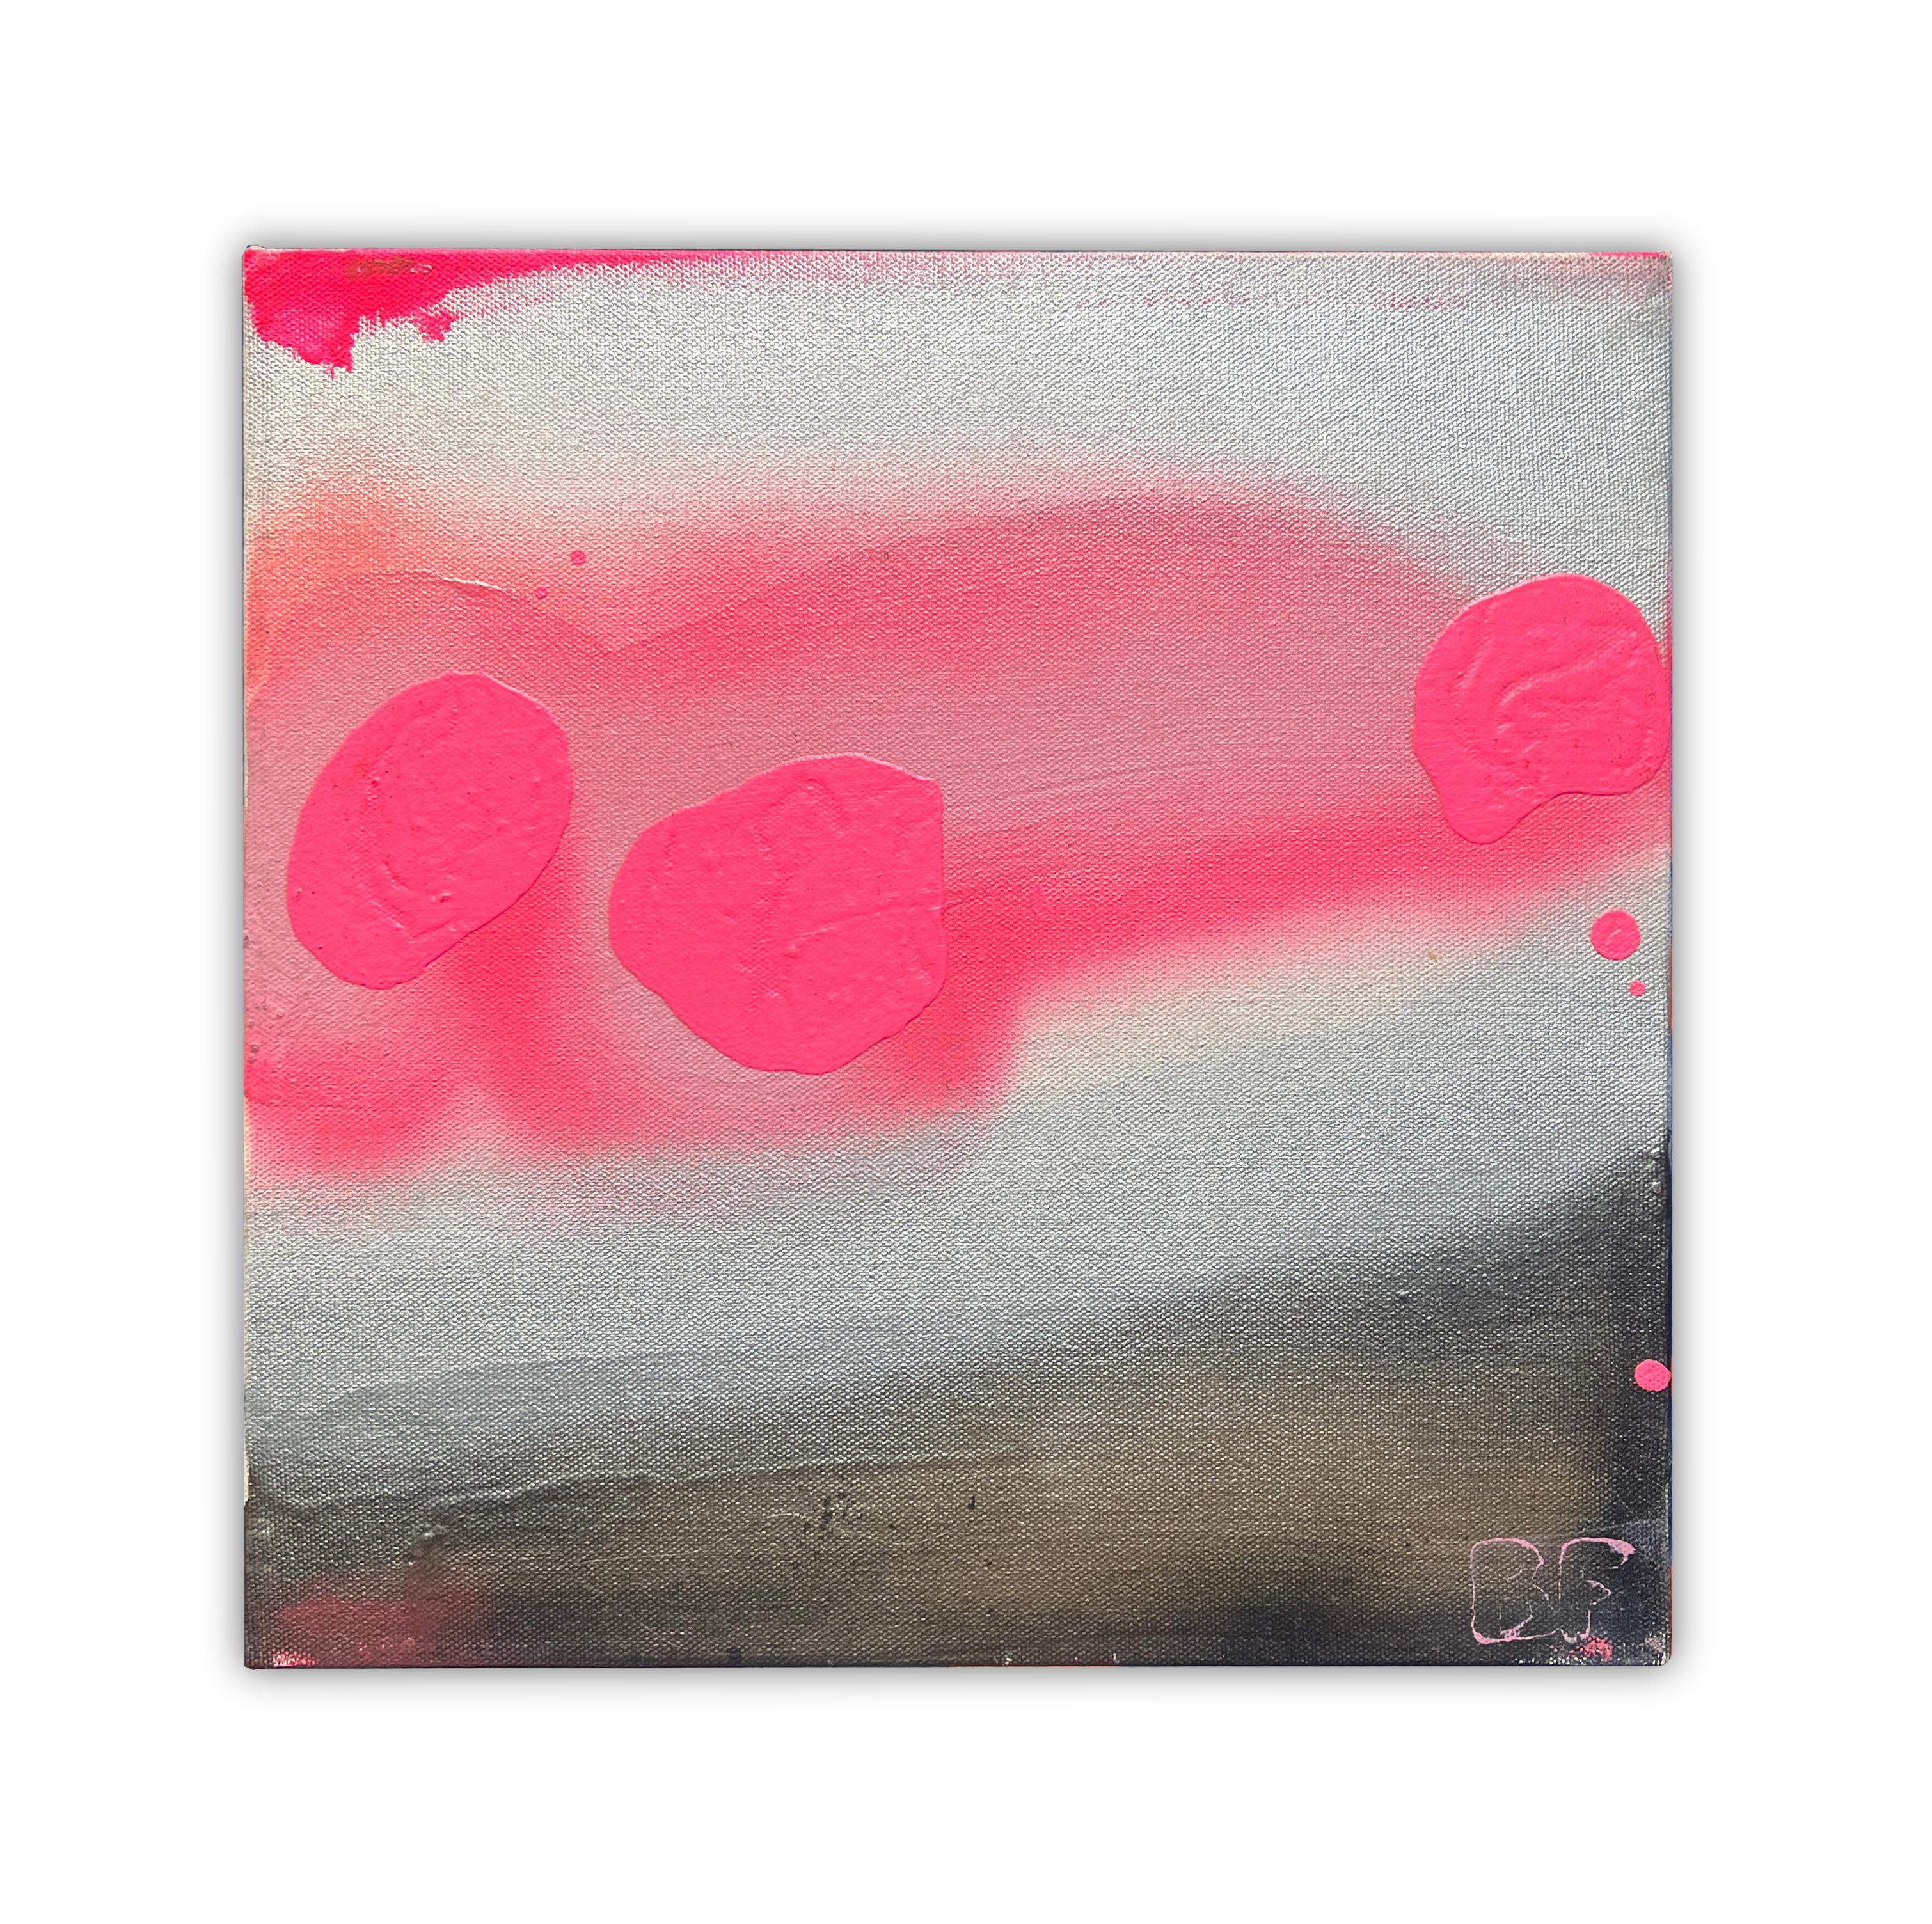 Little Pink Clouds II, by Brad Fisher 

Acrylic and day-glow spray paint on canvas

12 X 12 in.

Shipping is not included. See our shipping policies. Please contact us for shipping quotes and customization options. 


All sales are final.